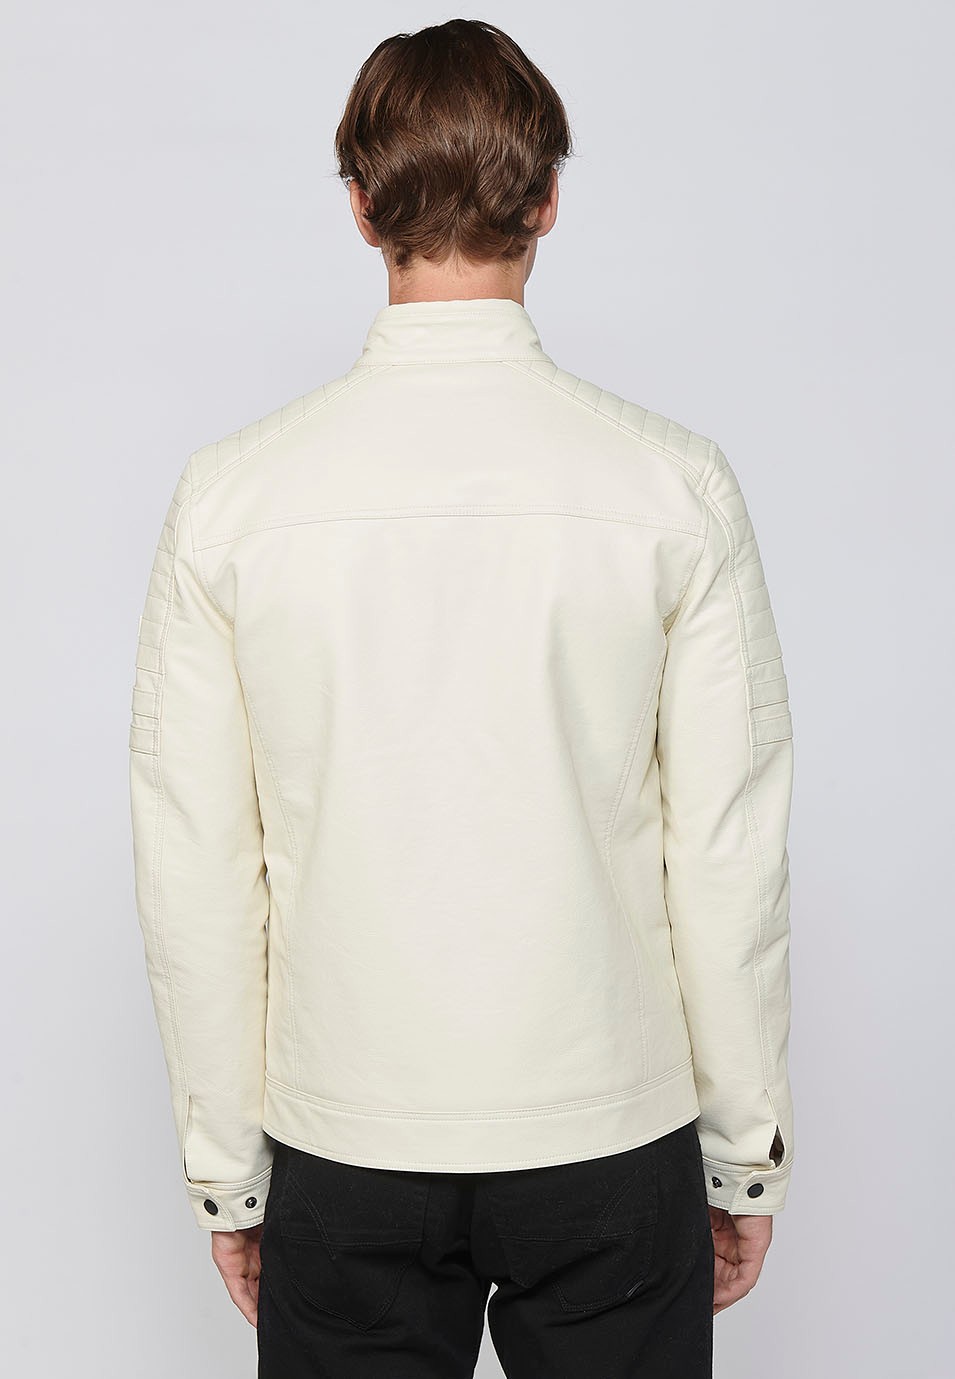 Long-sleeved Jacket with Round Neck and Details on the shoulders and arms in Ecru for Men